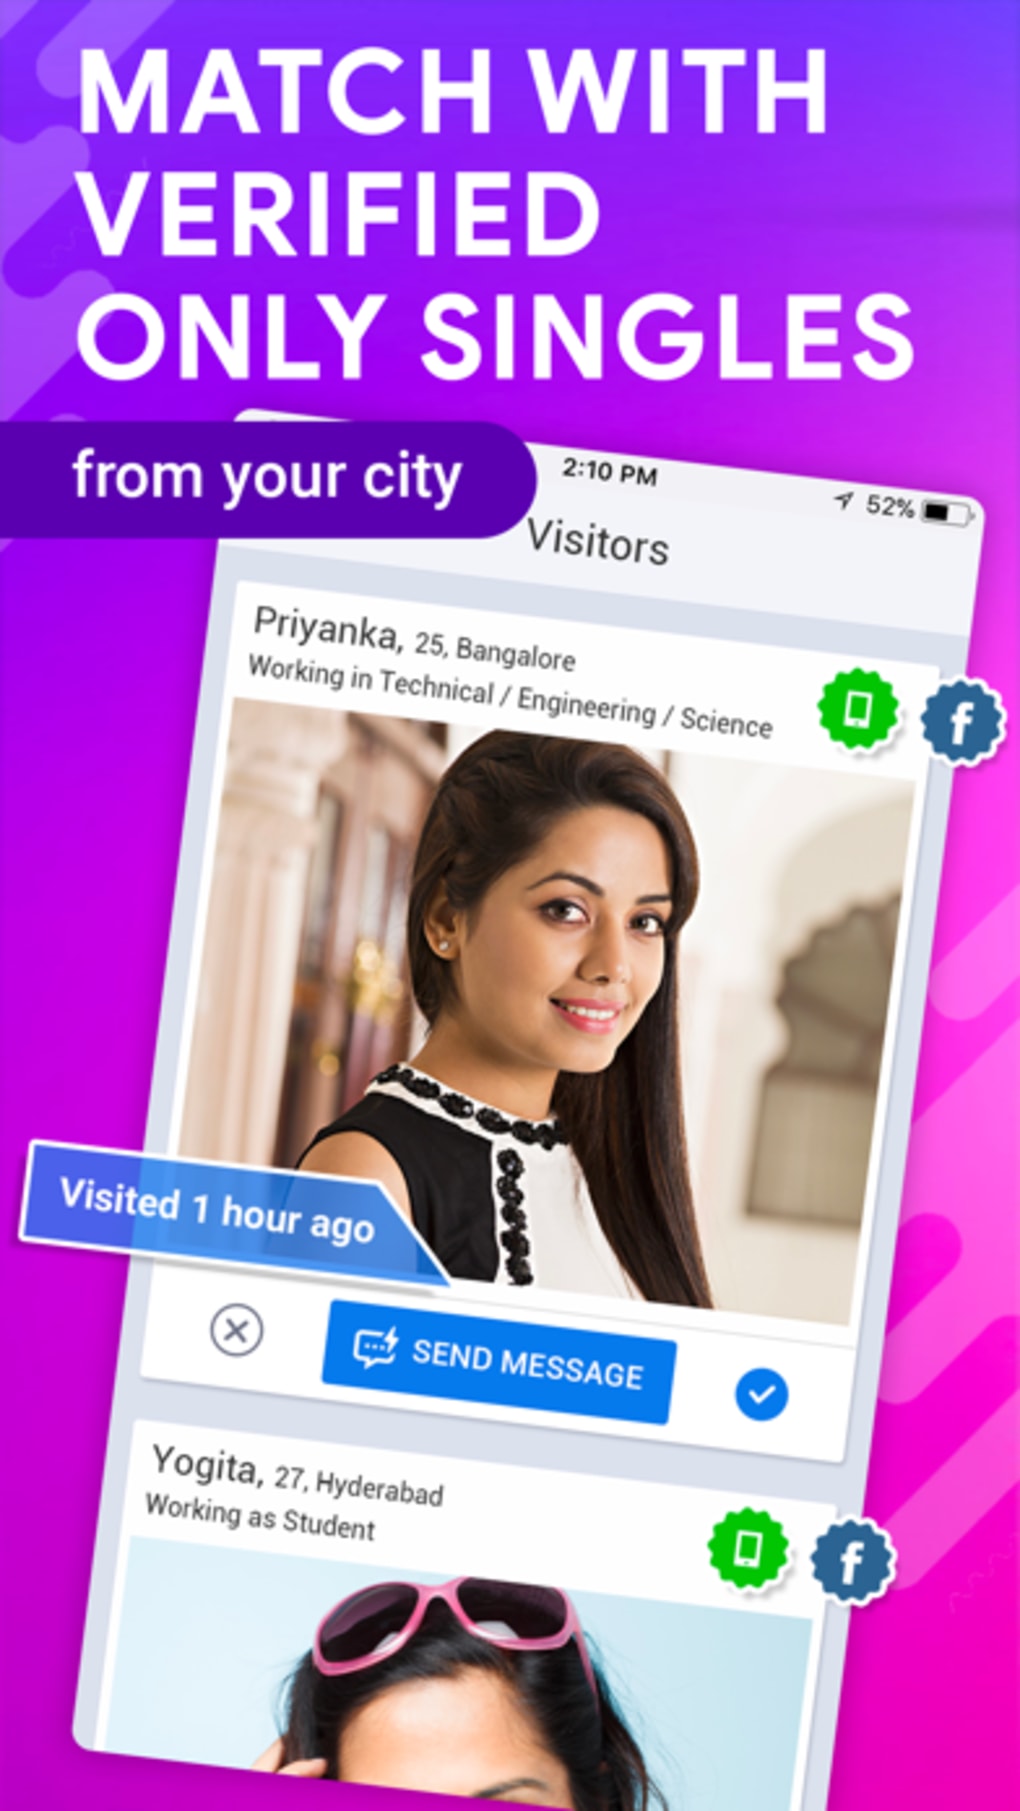 russian dating app in india